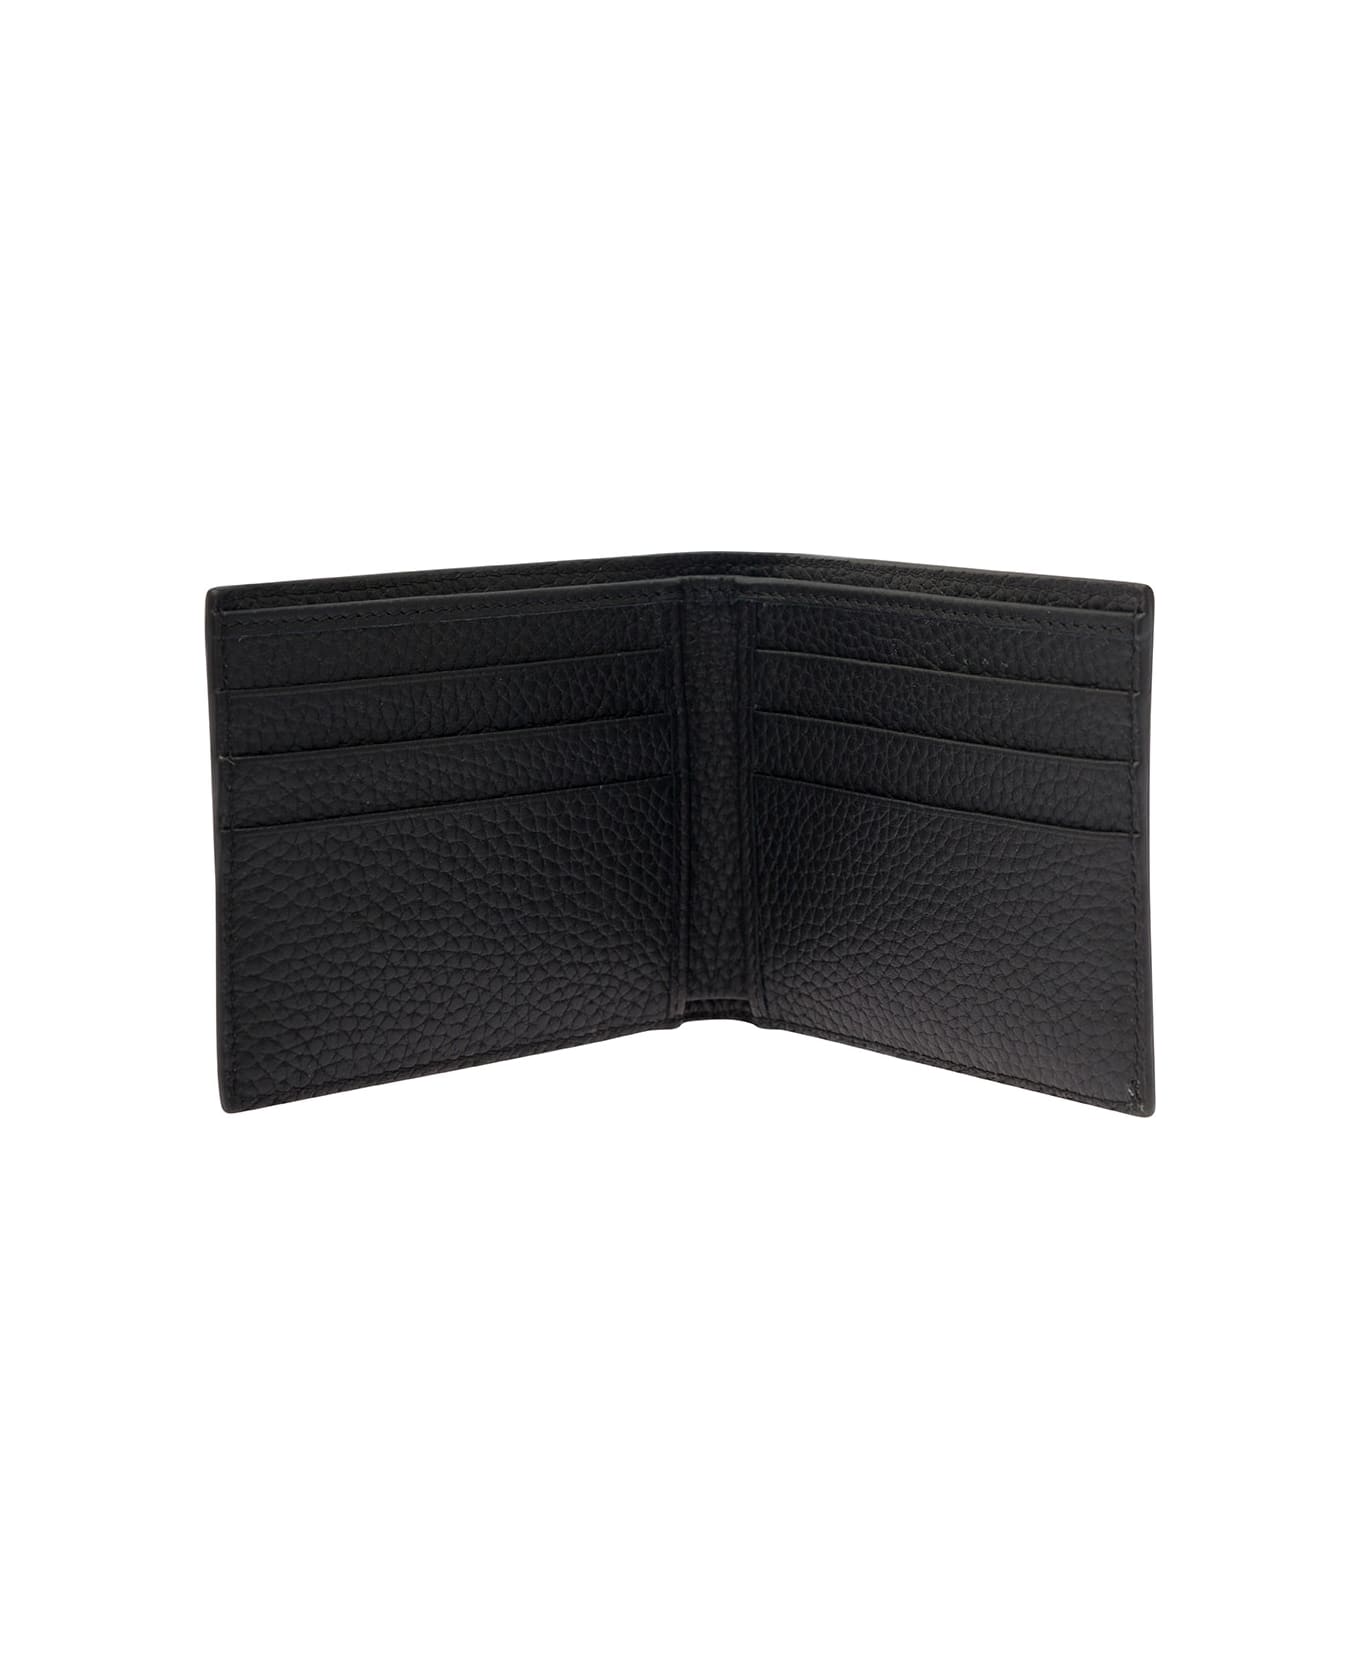 Dolce & Gabbana Black Bifold Wallet With Quilted Leather In Leather Man - Black